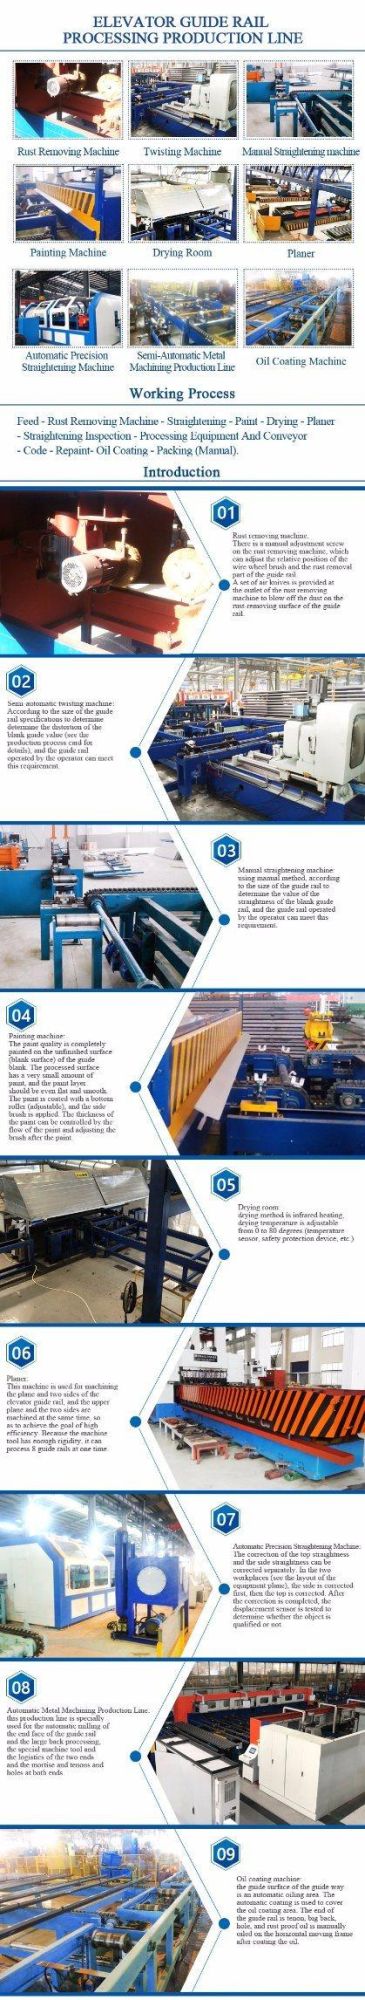 Direct Factory Selling T Shaped Cold Roll Forming Machine Elevator Guide Rail Machine